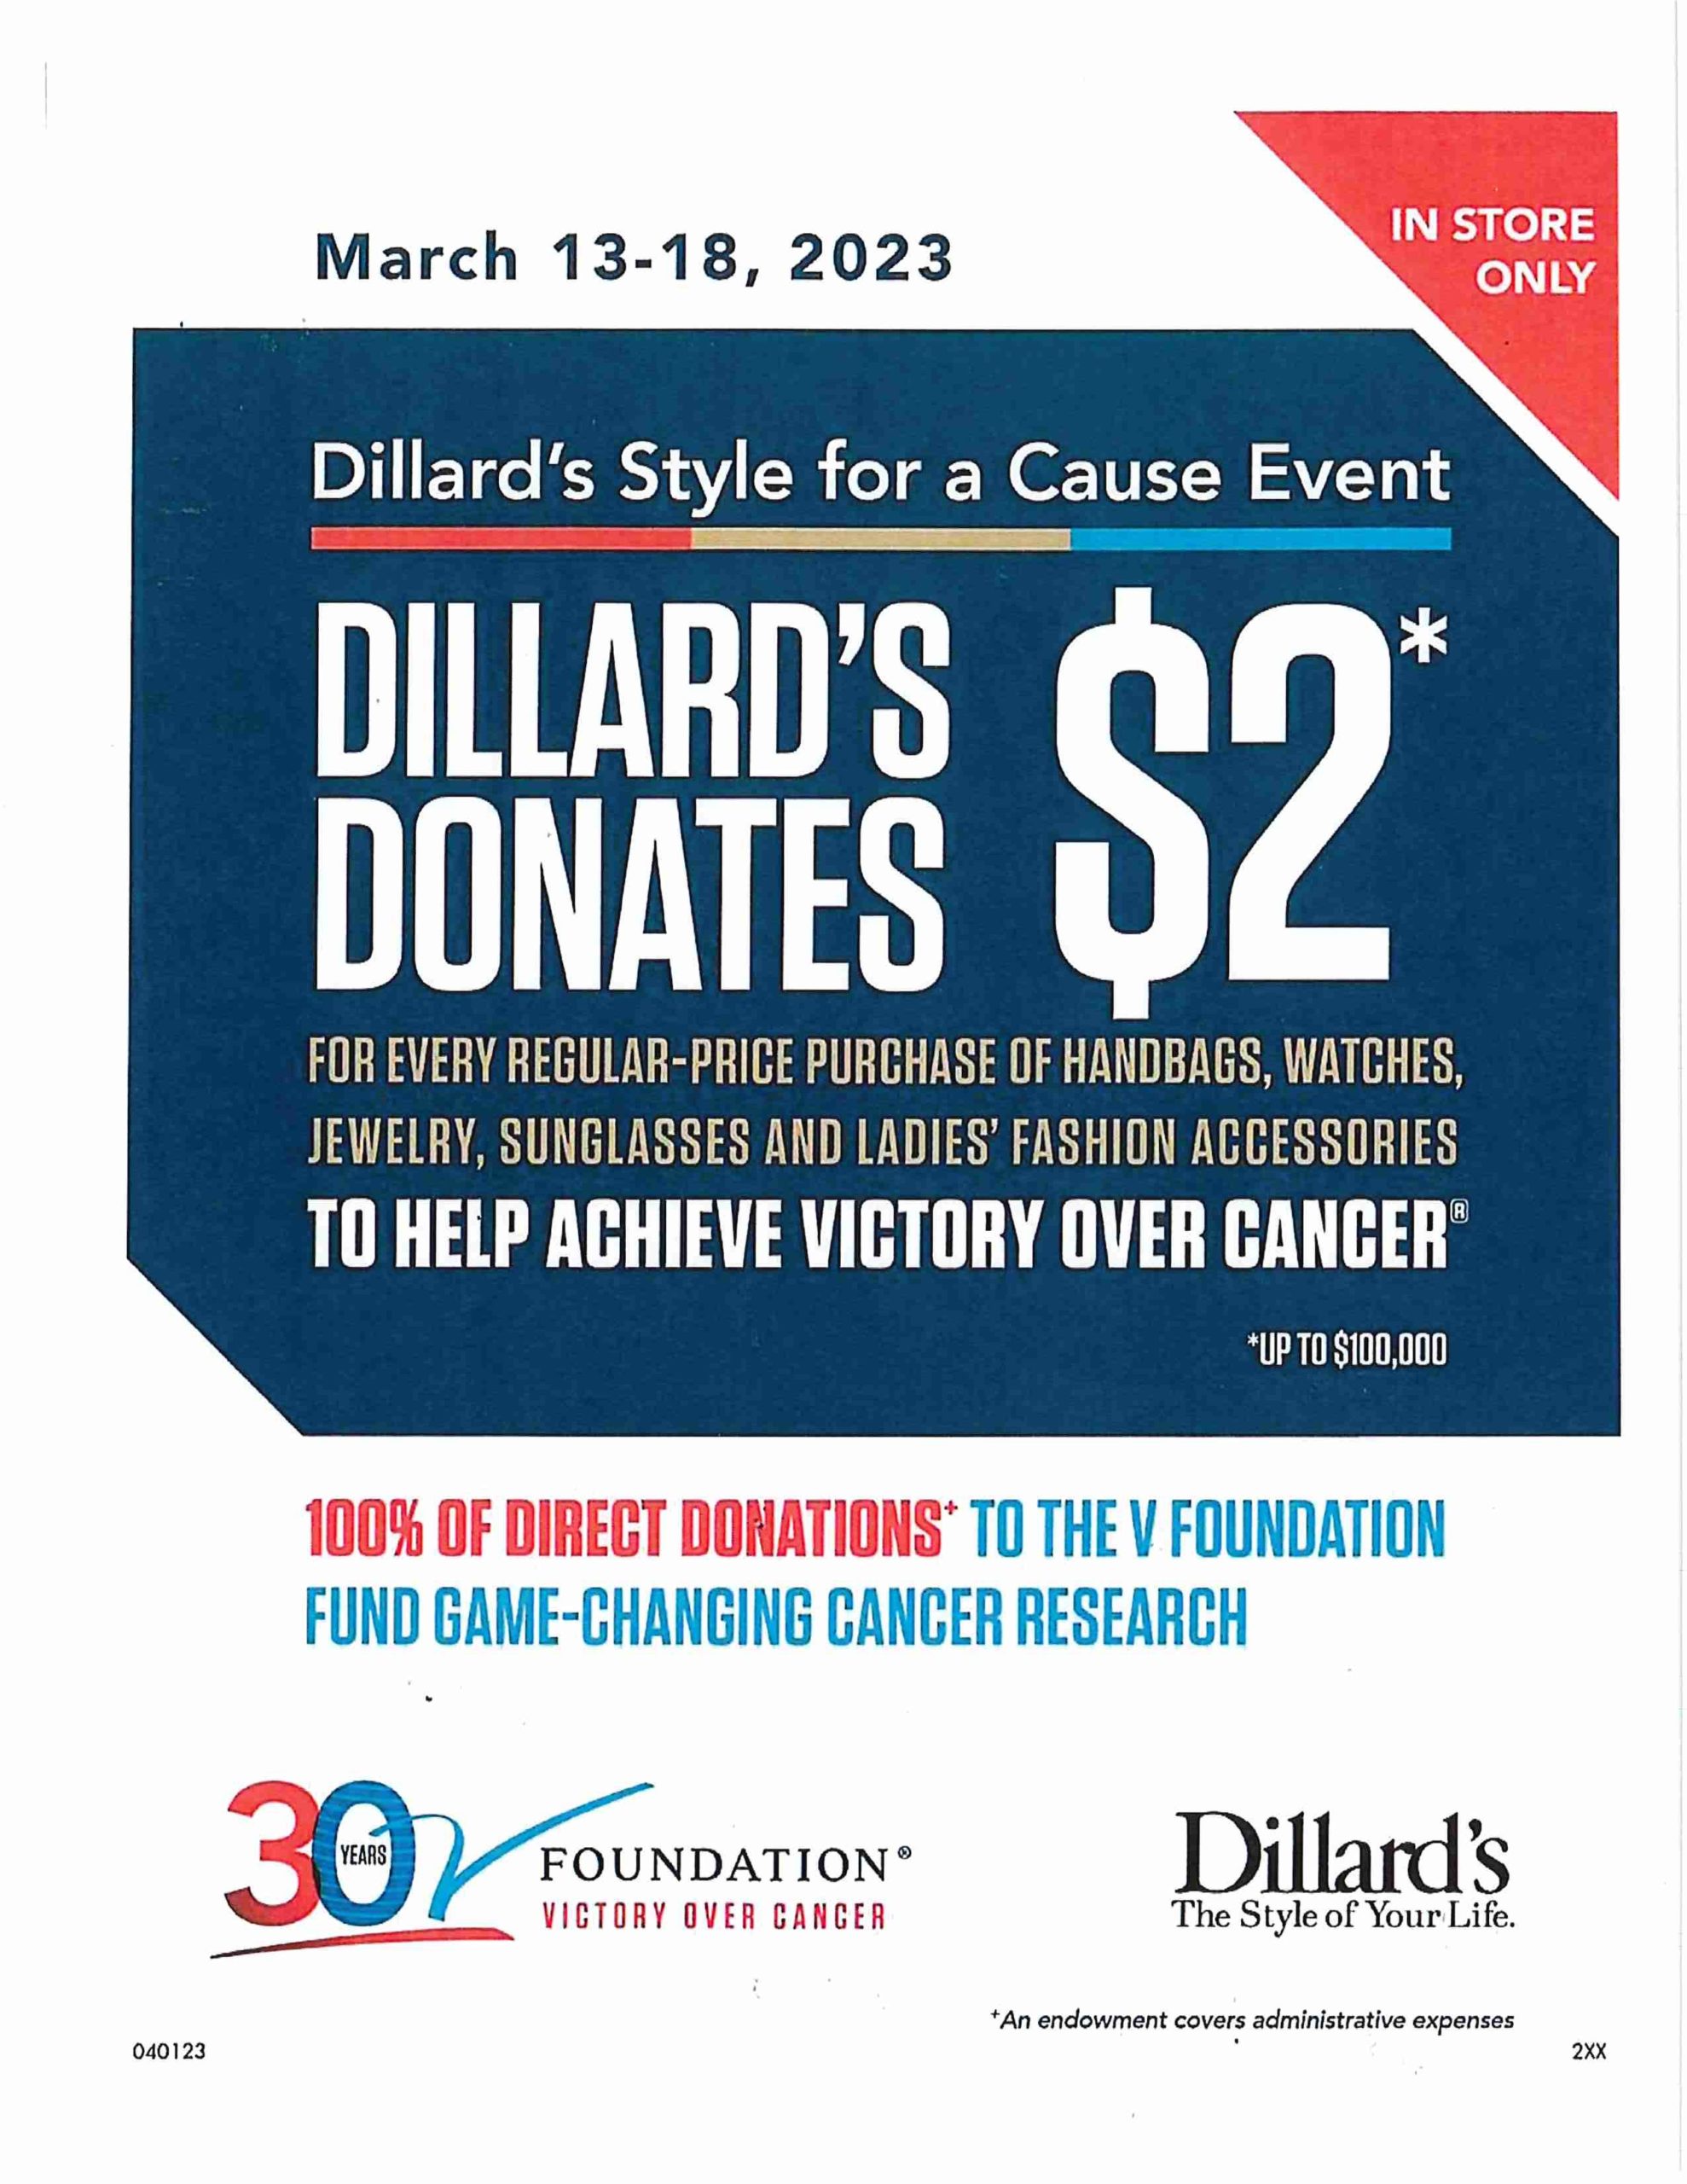 Local Dillard's store raises money for cancer research